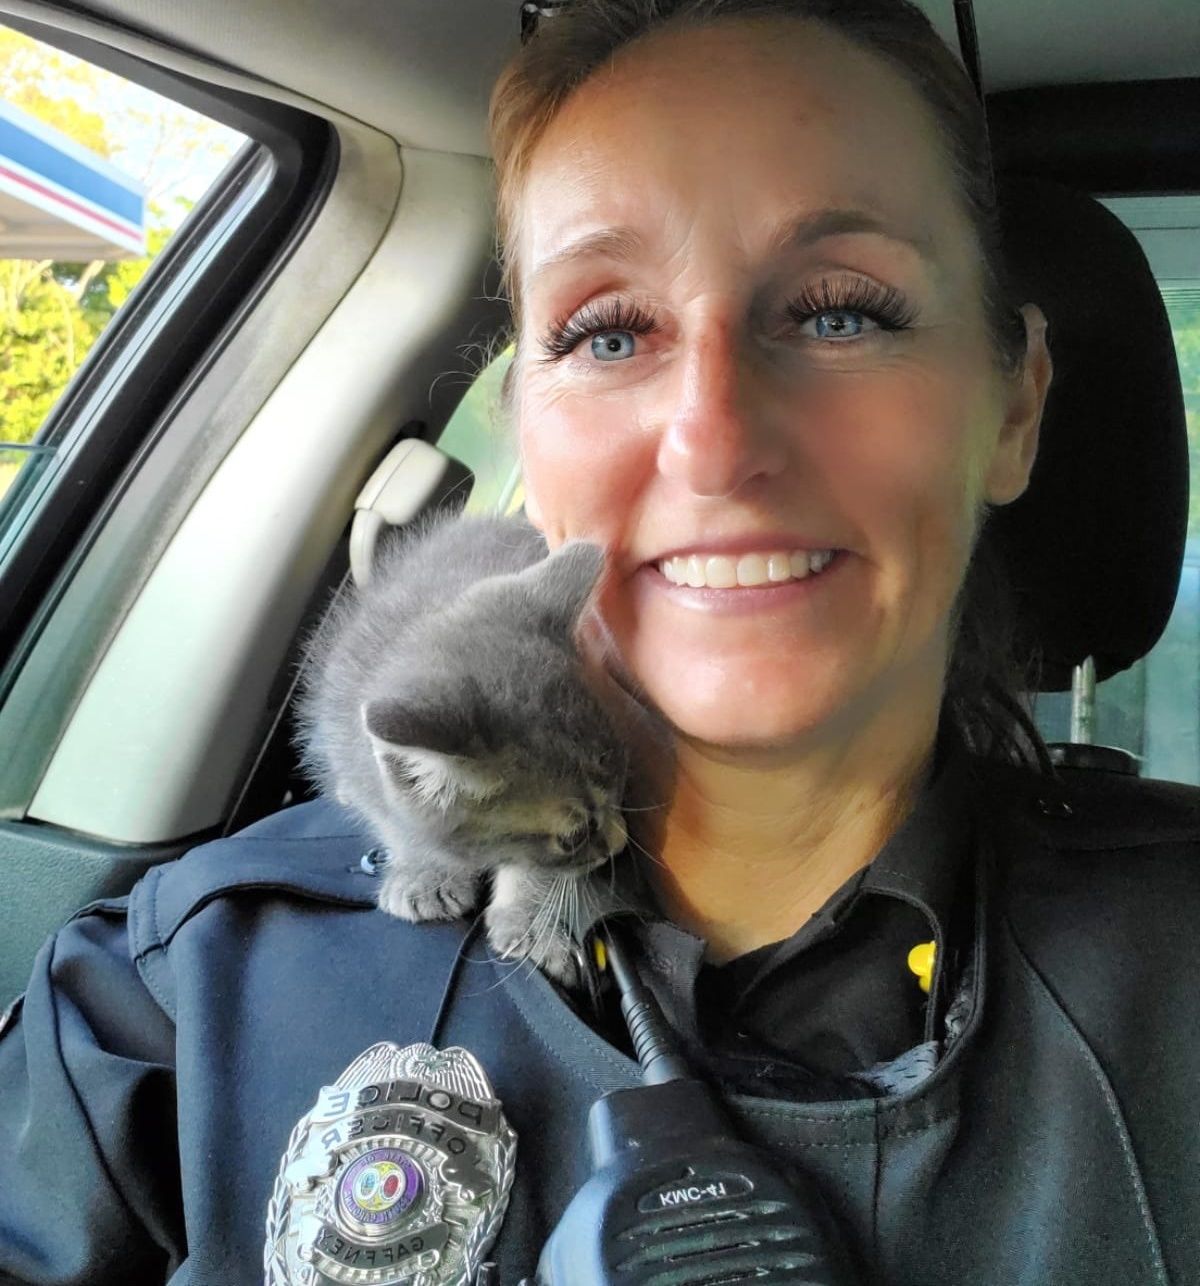 Kitten adopted by Charleston police officer who saved her from car